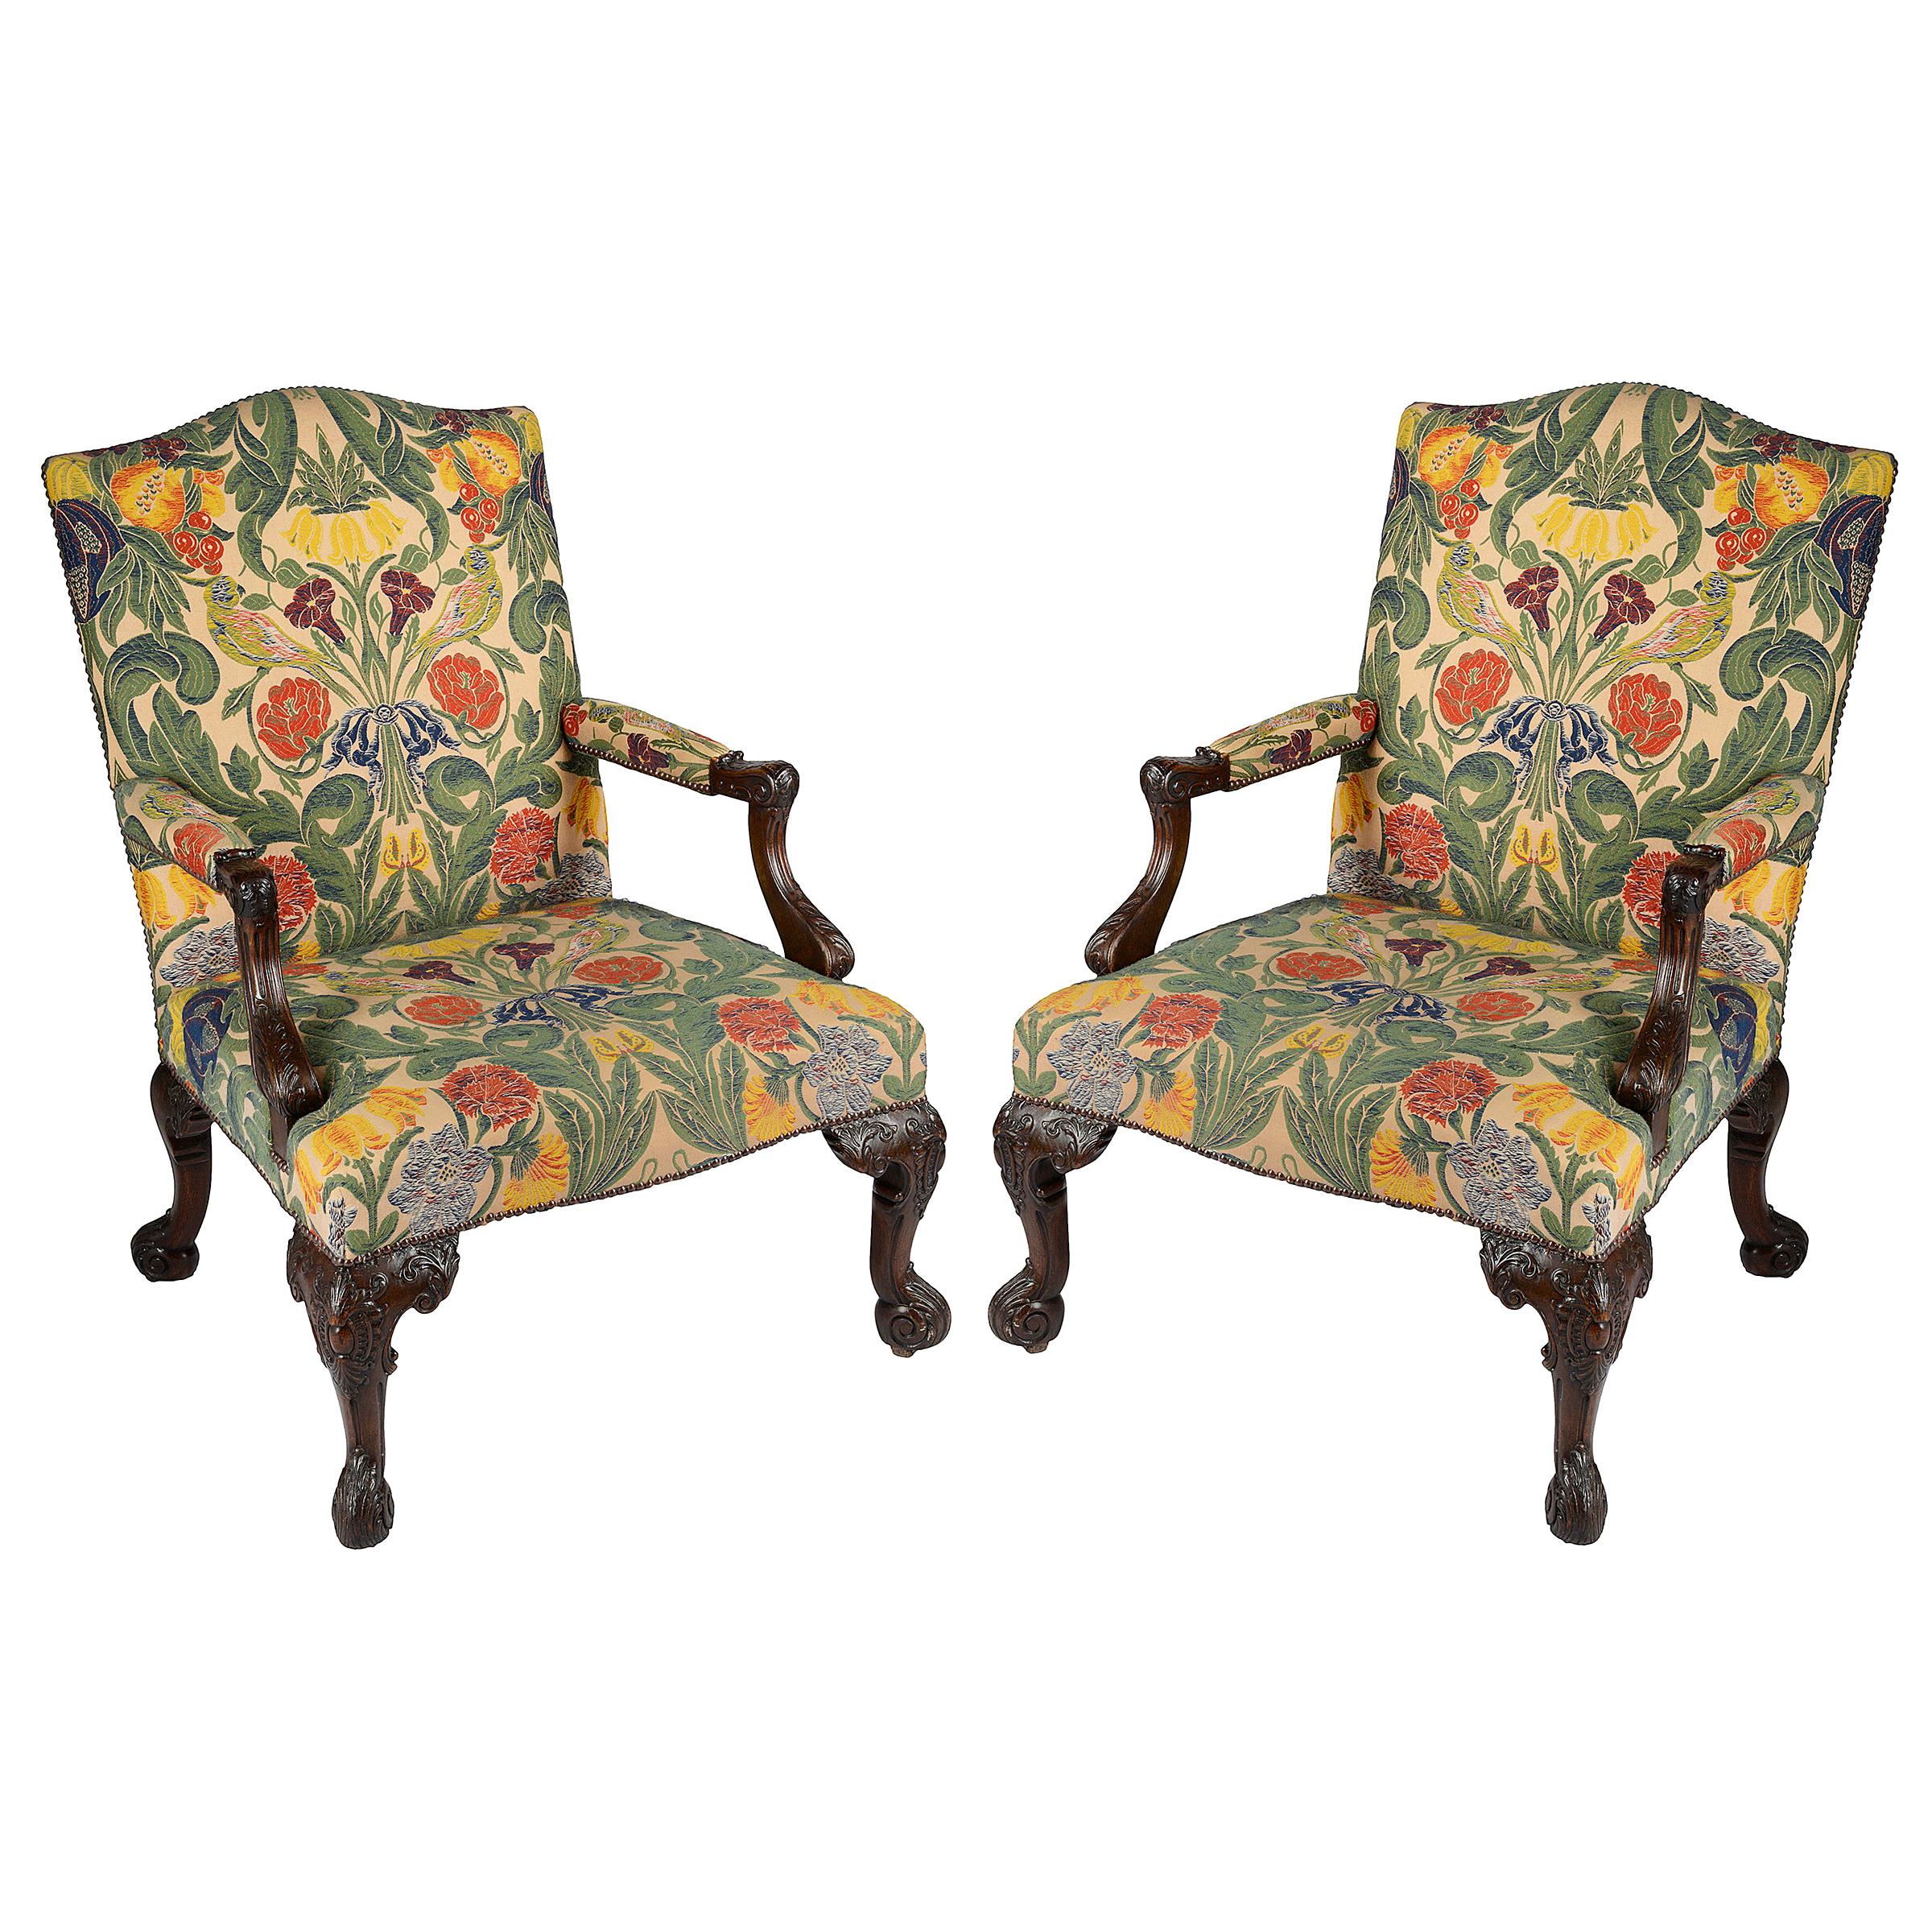 Large Pair of George II Style Mahogany Gainsborough Armchairs